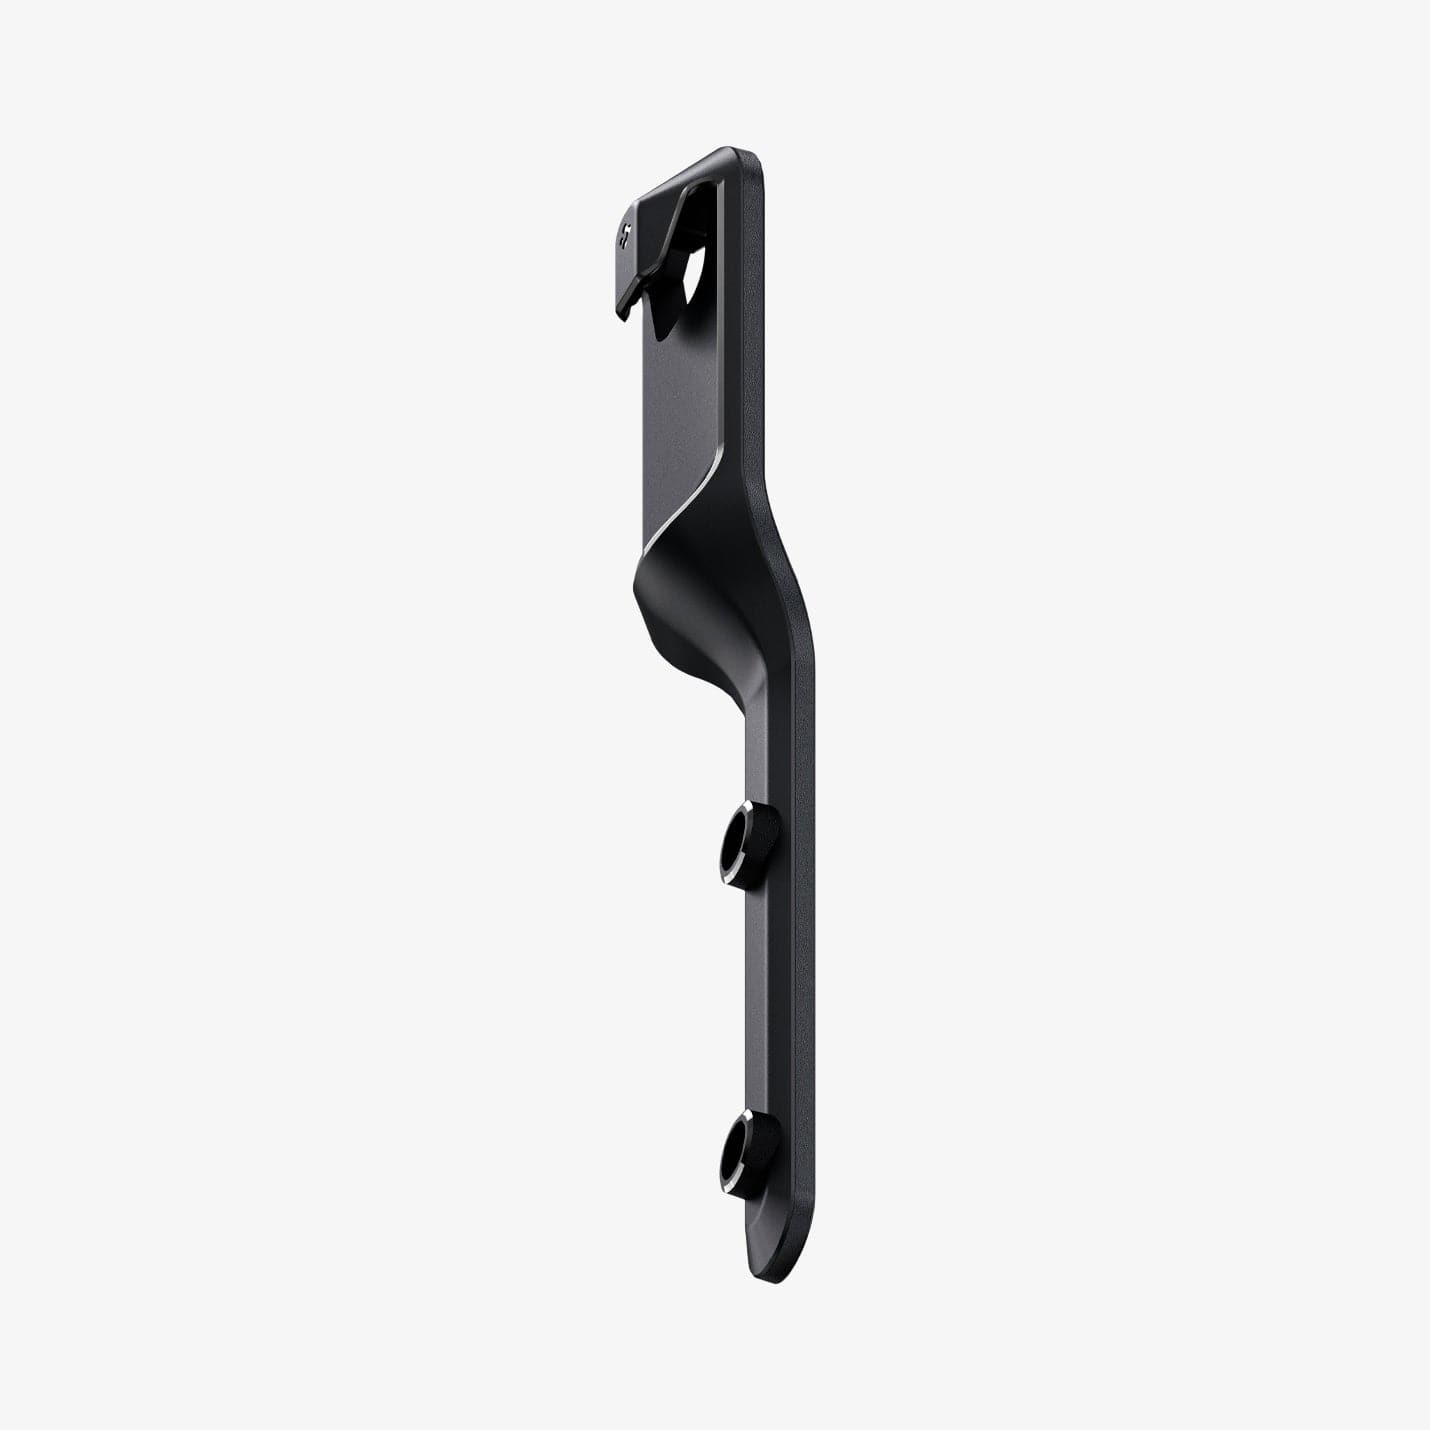 ACP06041 - Tesla Model Y Backseat Seatbelt Guide in black showing the front and side